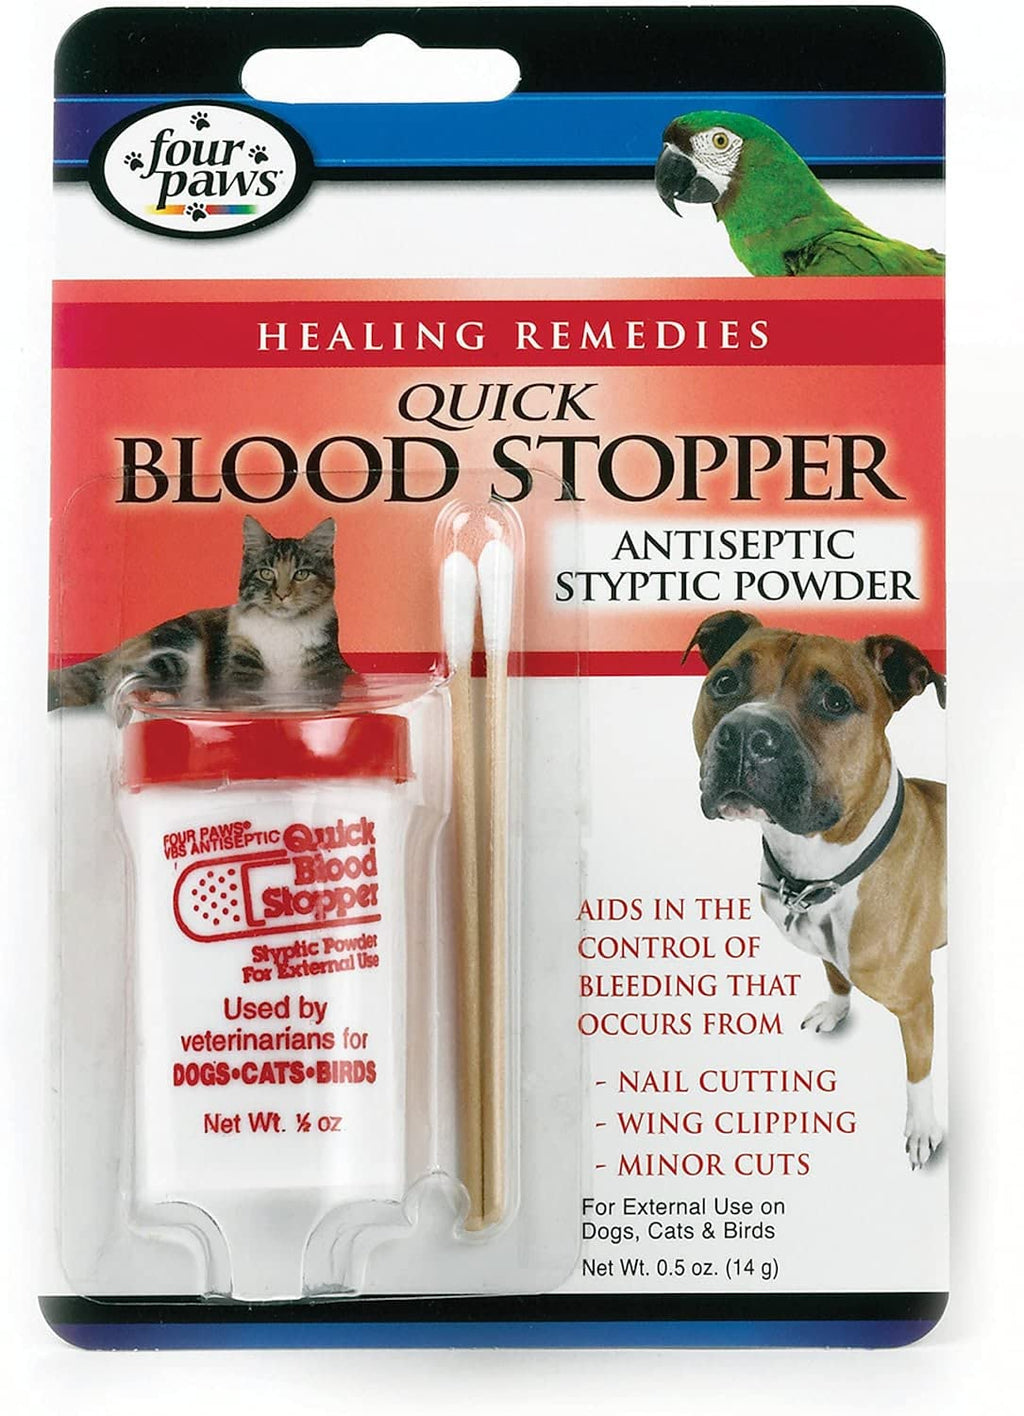 Four-Paws 4 Pack of Quick Blood Stopper Kits, 0.5 Ounces each, Antiseptic Styptic Powder and Swabs for Dogs, Cats and Birds - BeesActive Australia